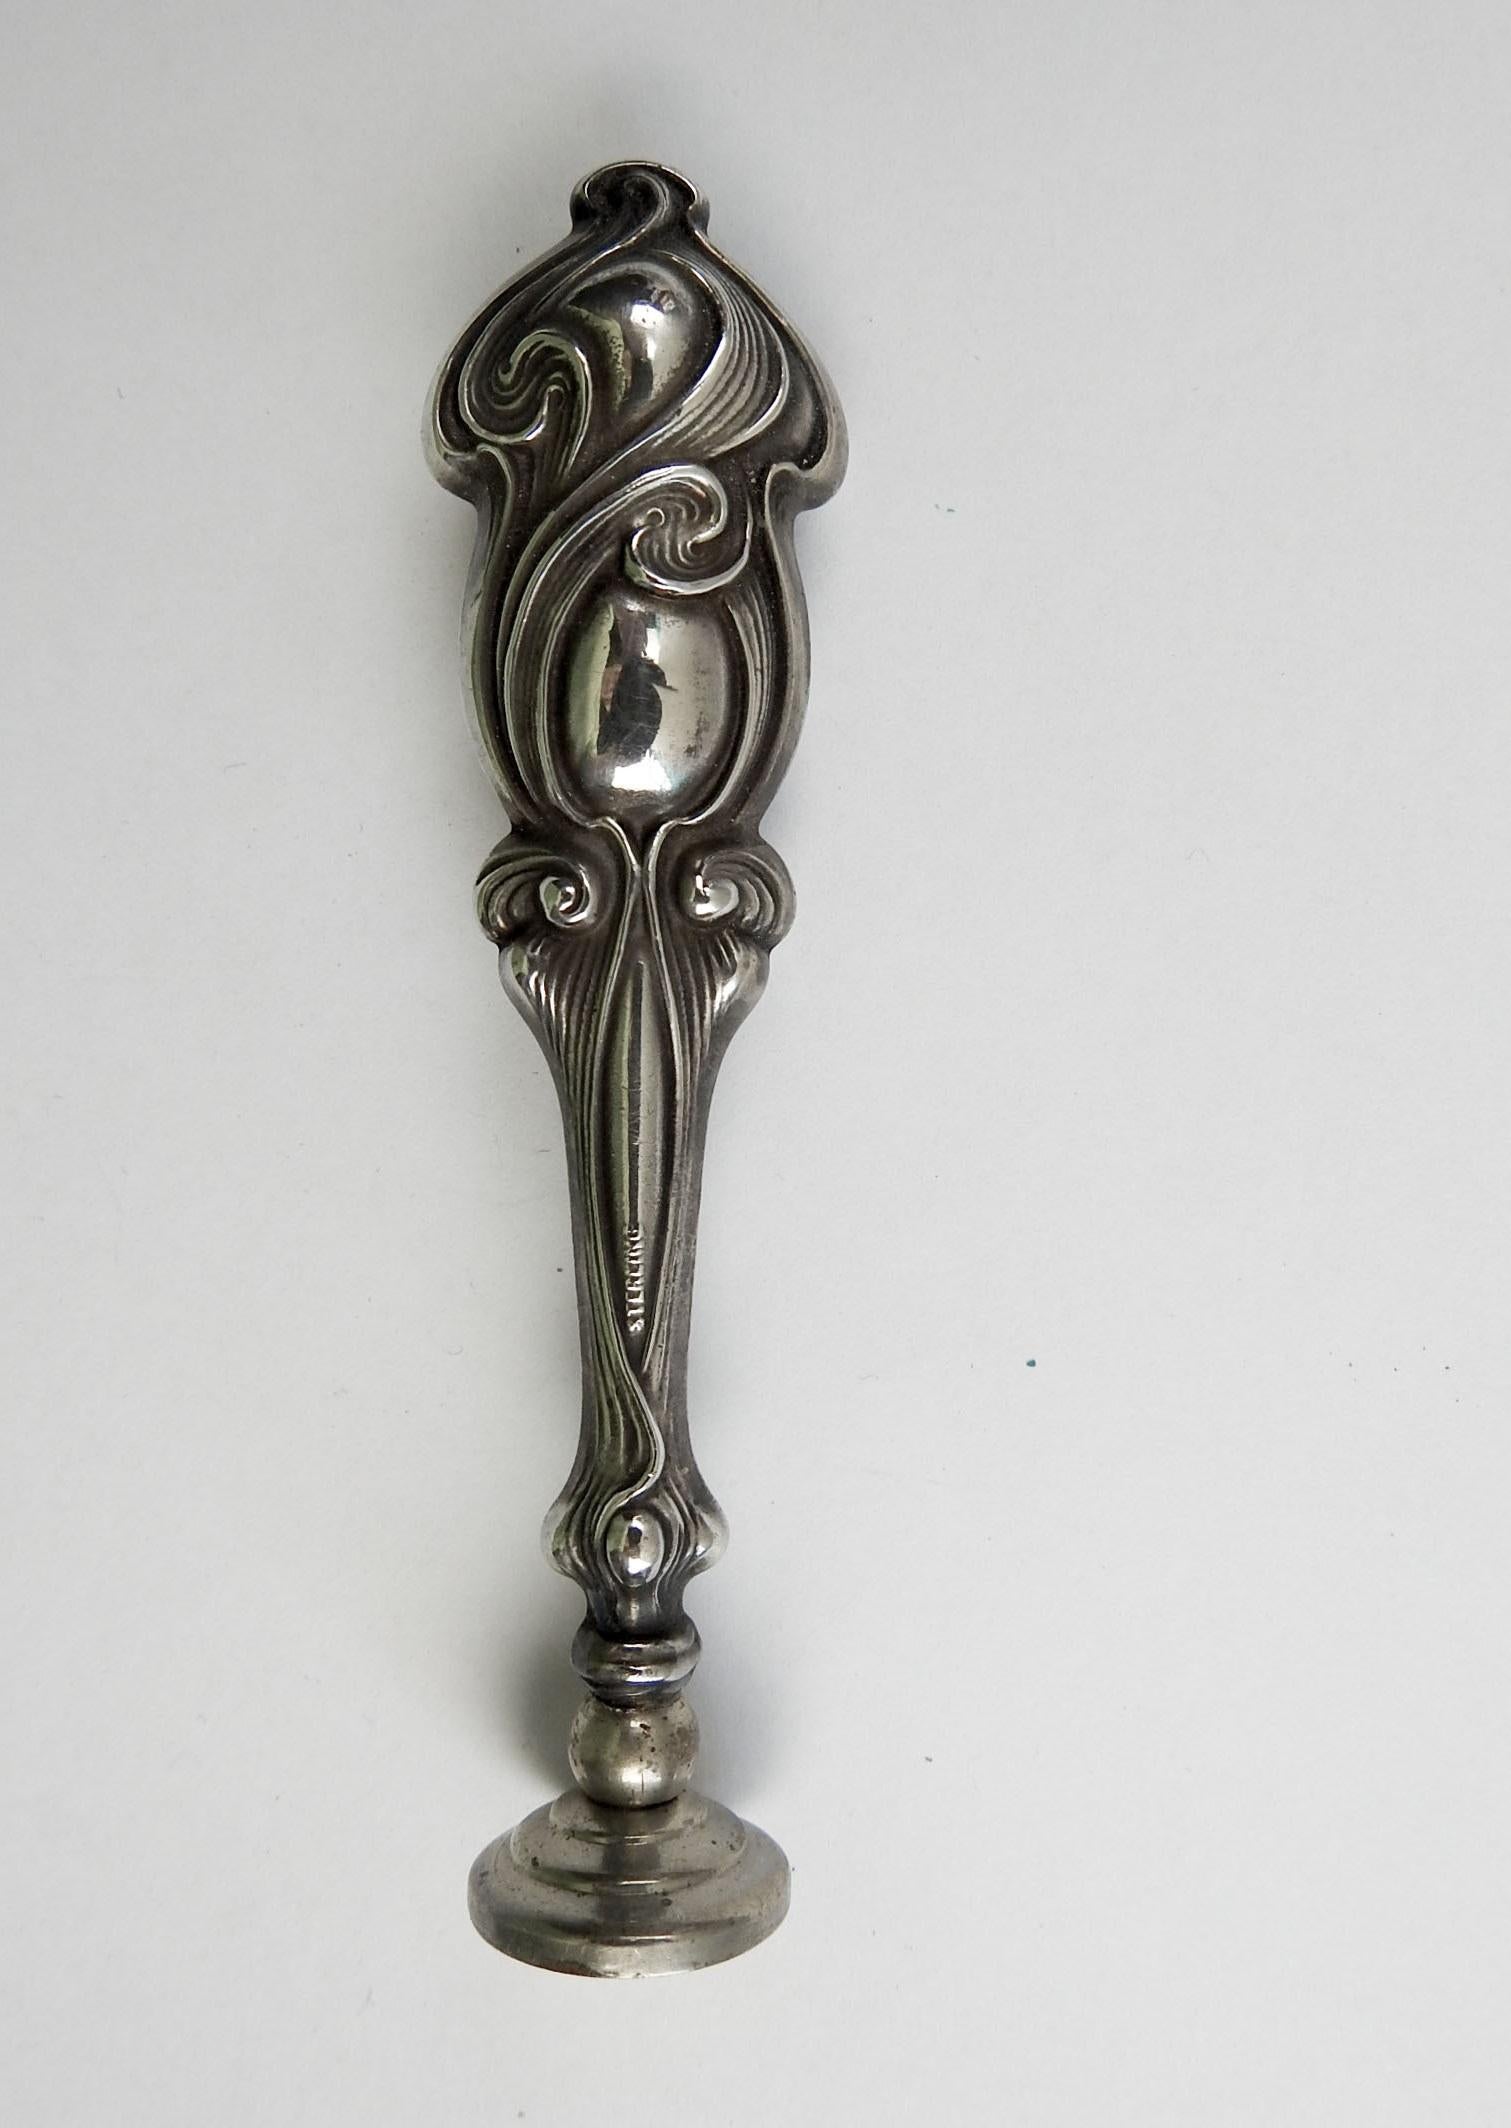 Antique sterling silver handle for wax seal. New old stock, the owner would have an engraved stamp made to attach to the handle. Send your correspondence off with style! Beautiful Art Nouveau style. Area to attach seal is 3/4